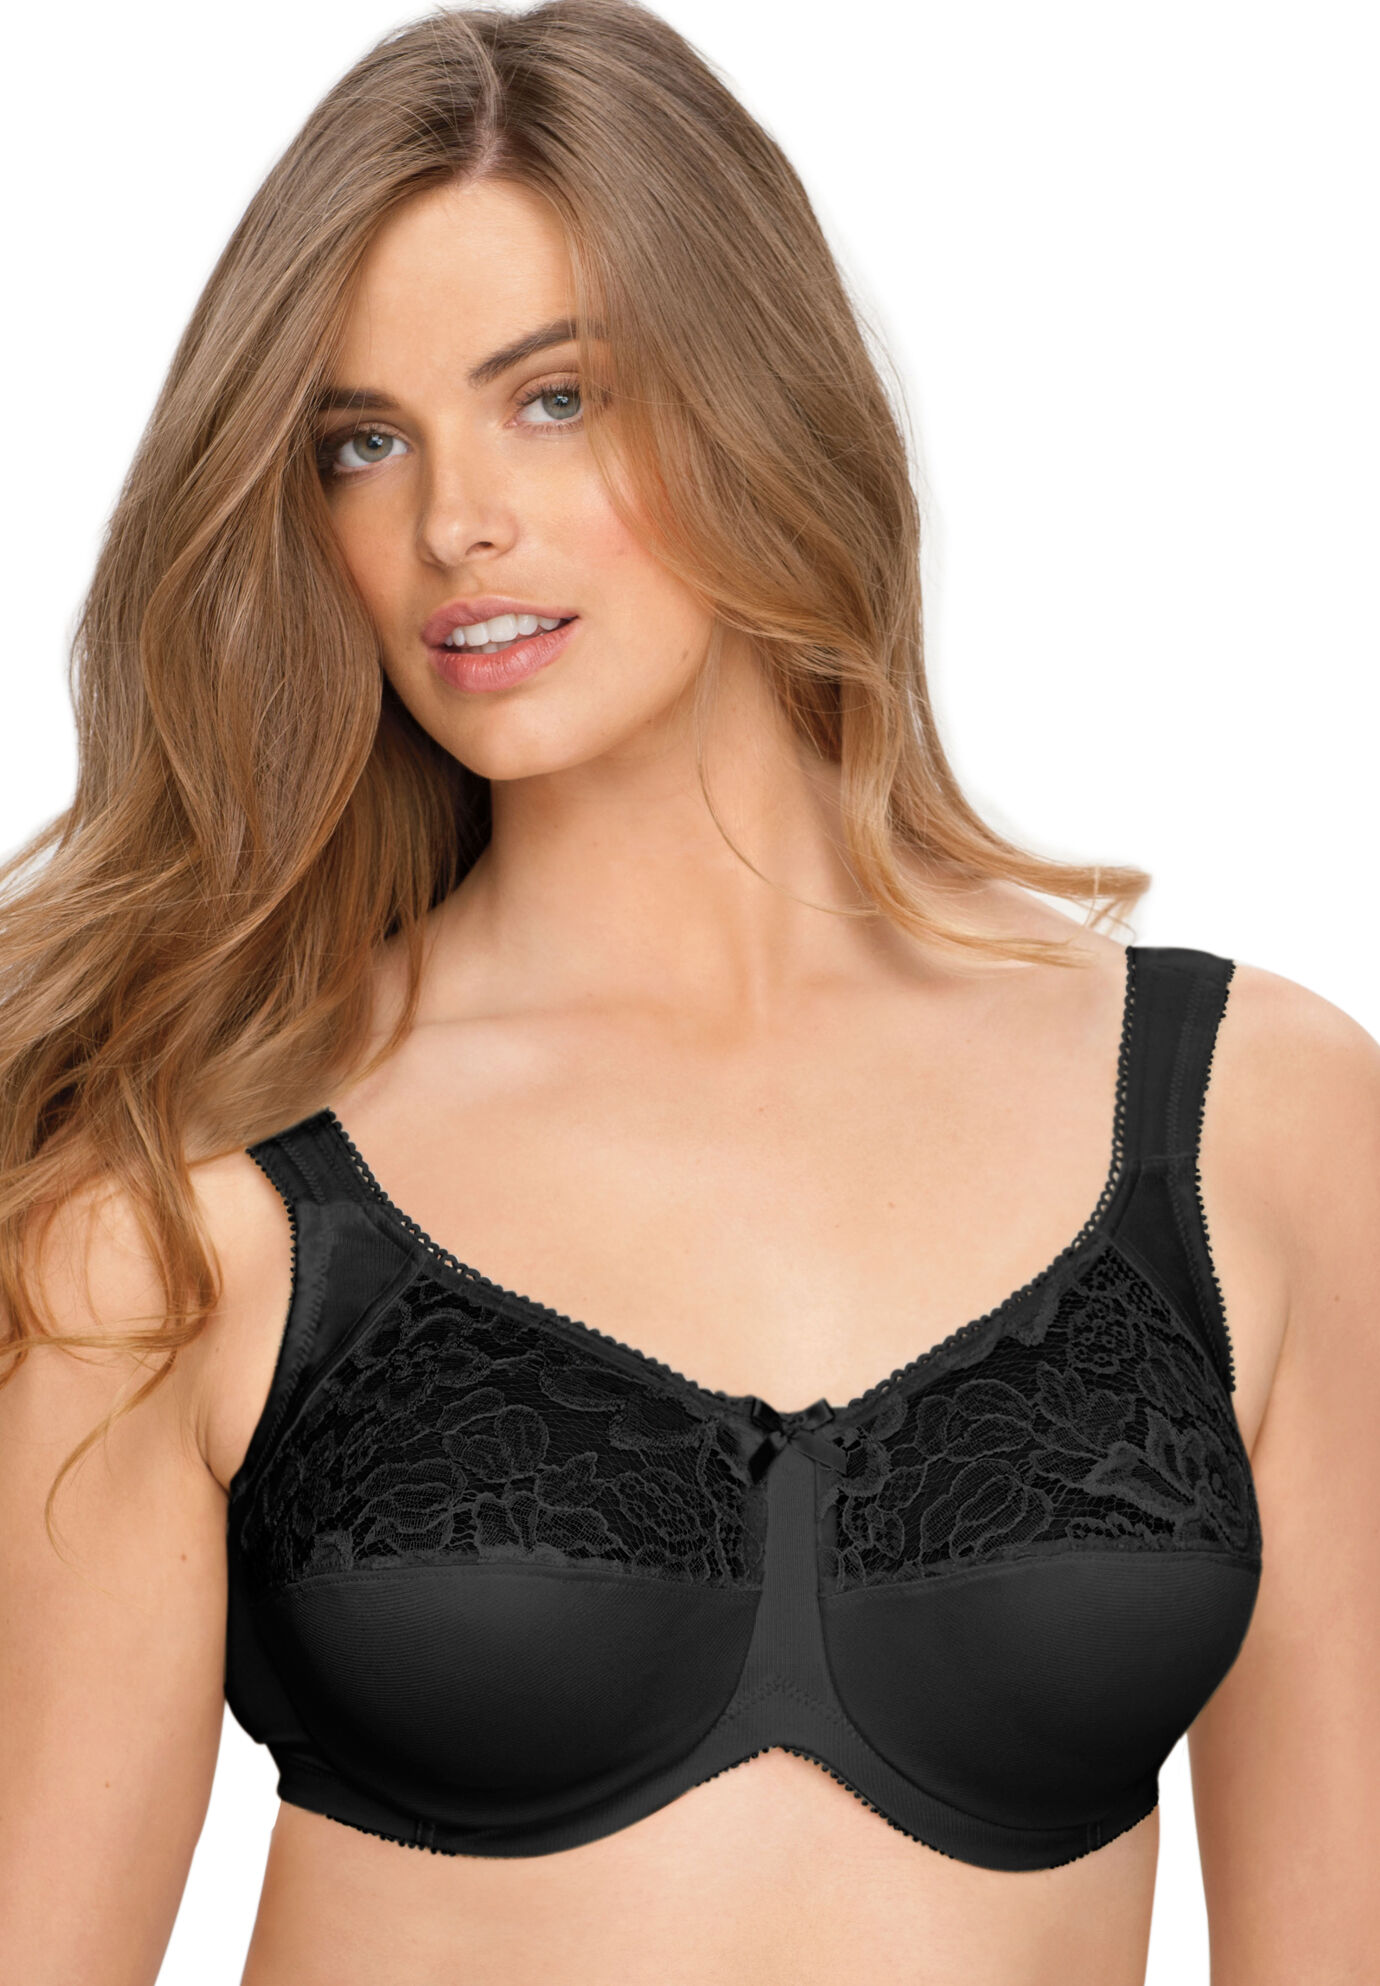 Plus Size Women's Underwire Lace Top Full Support Bra by Aviana in Black (Size 34 G)